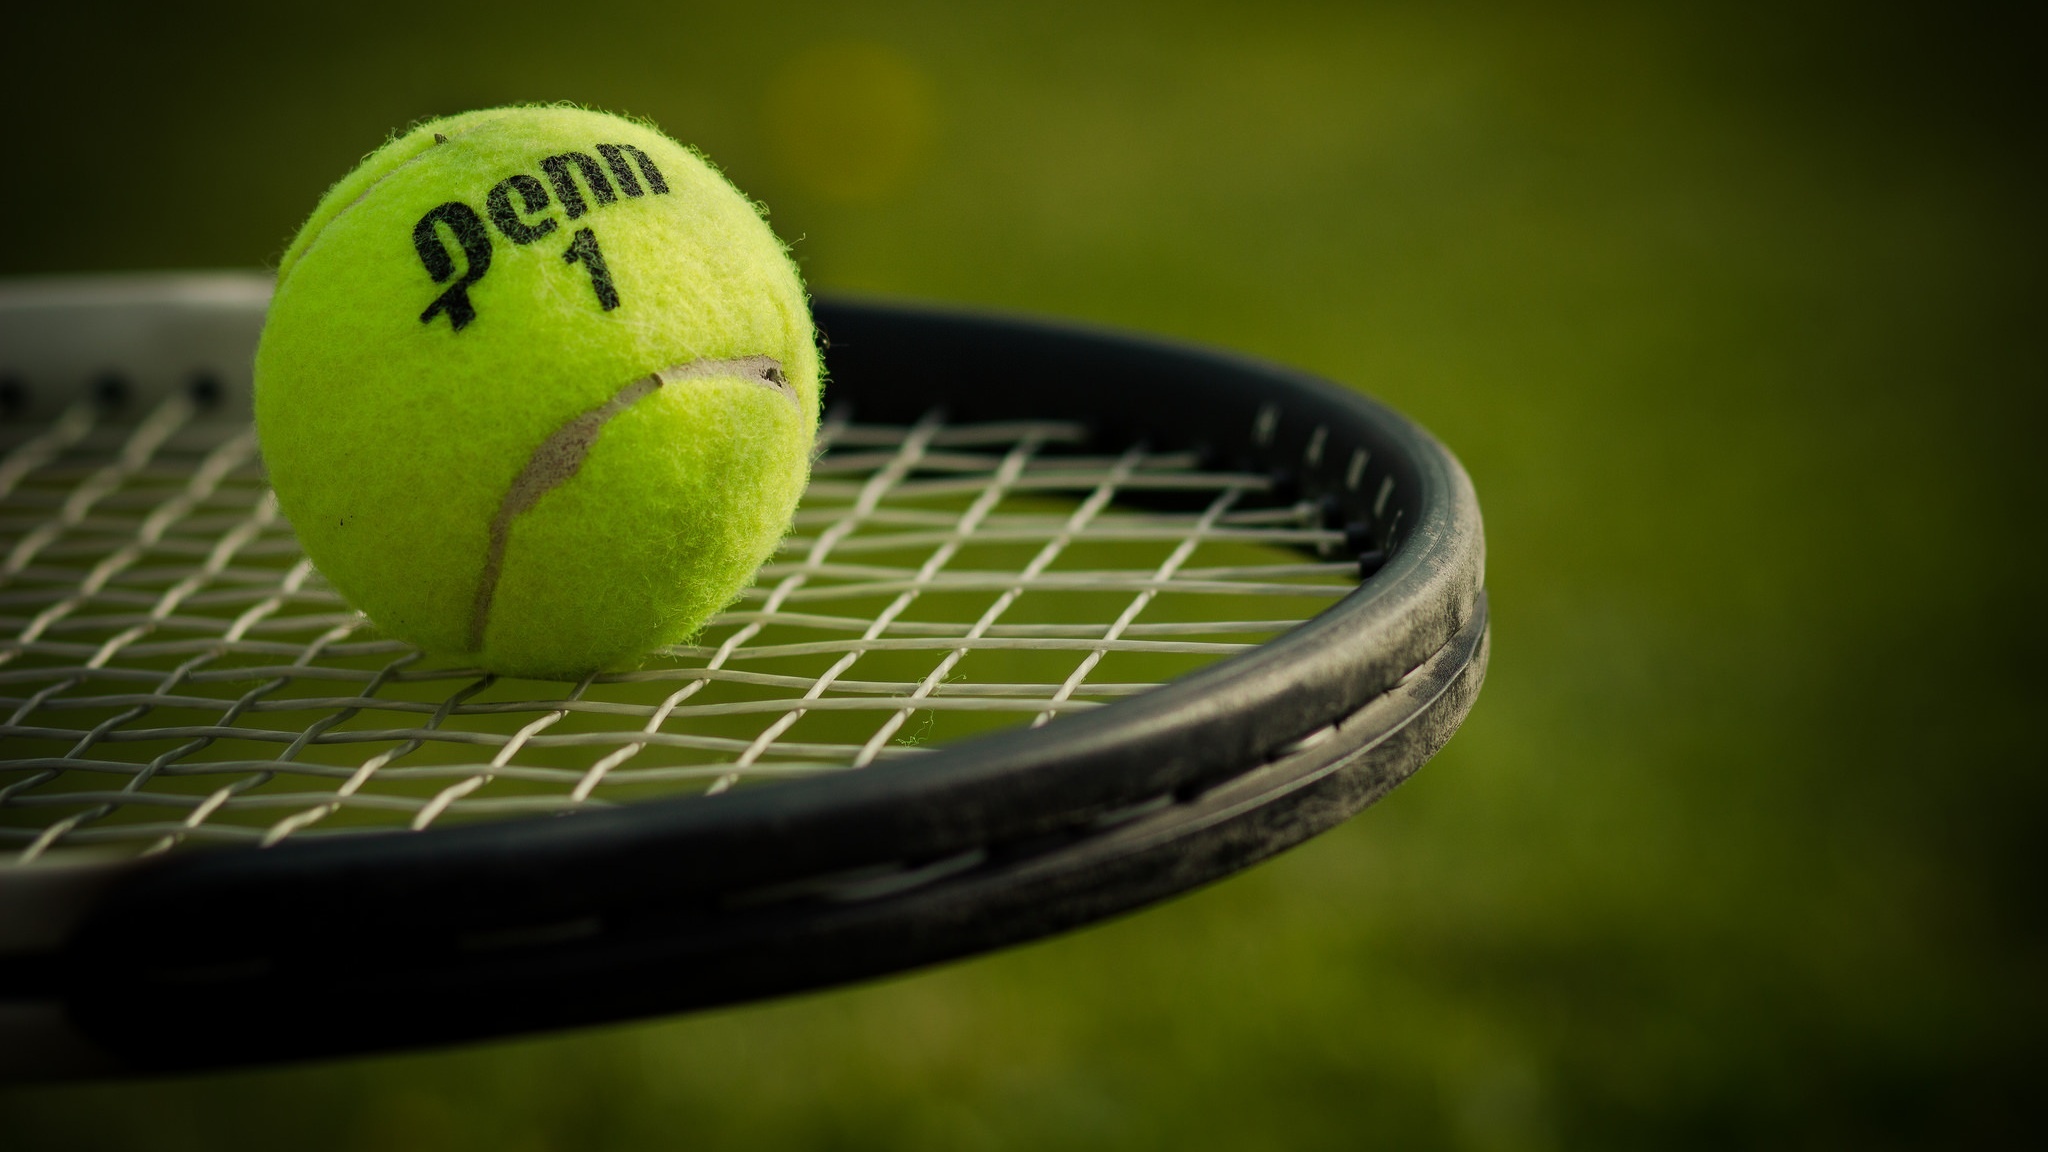 Tennis today 02.08. Schedule, Predictions & Betting Tips